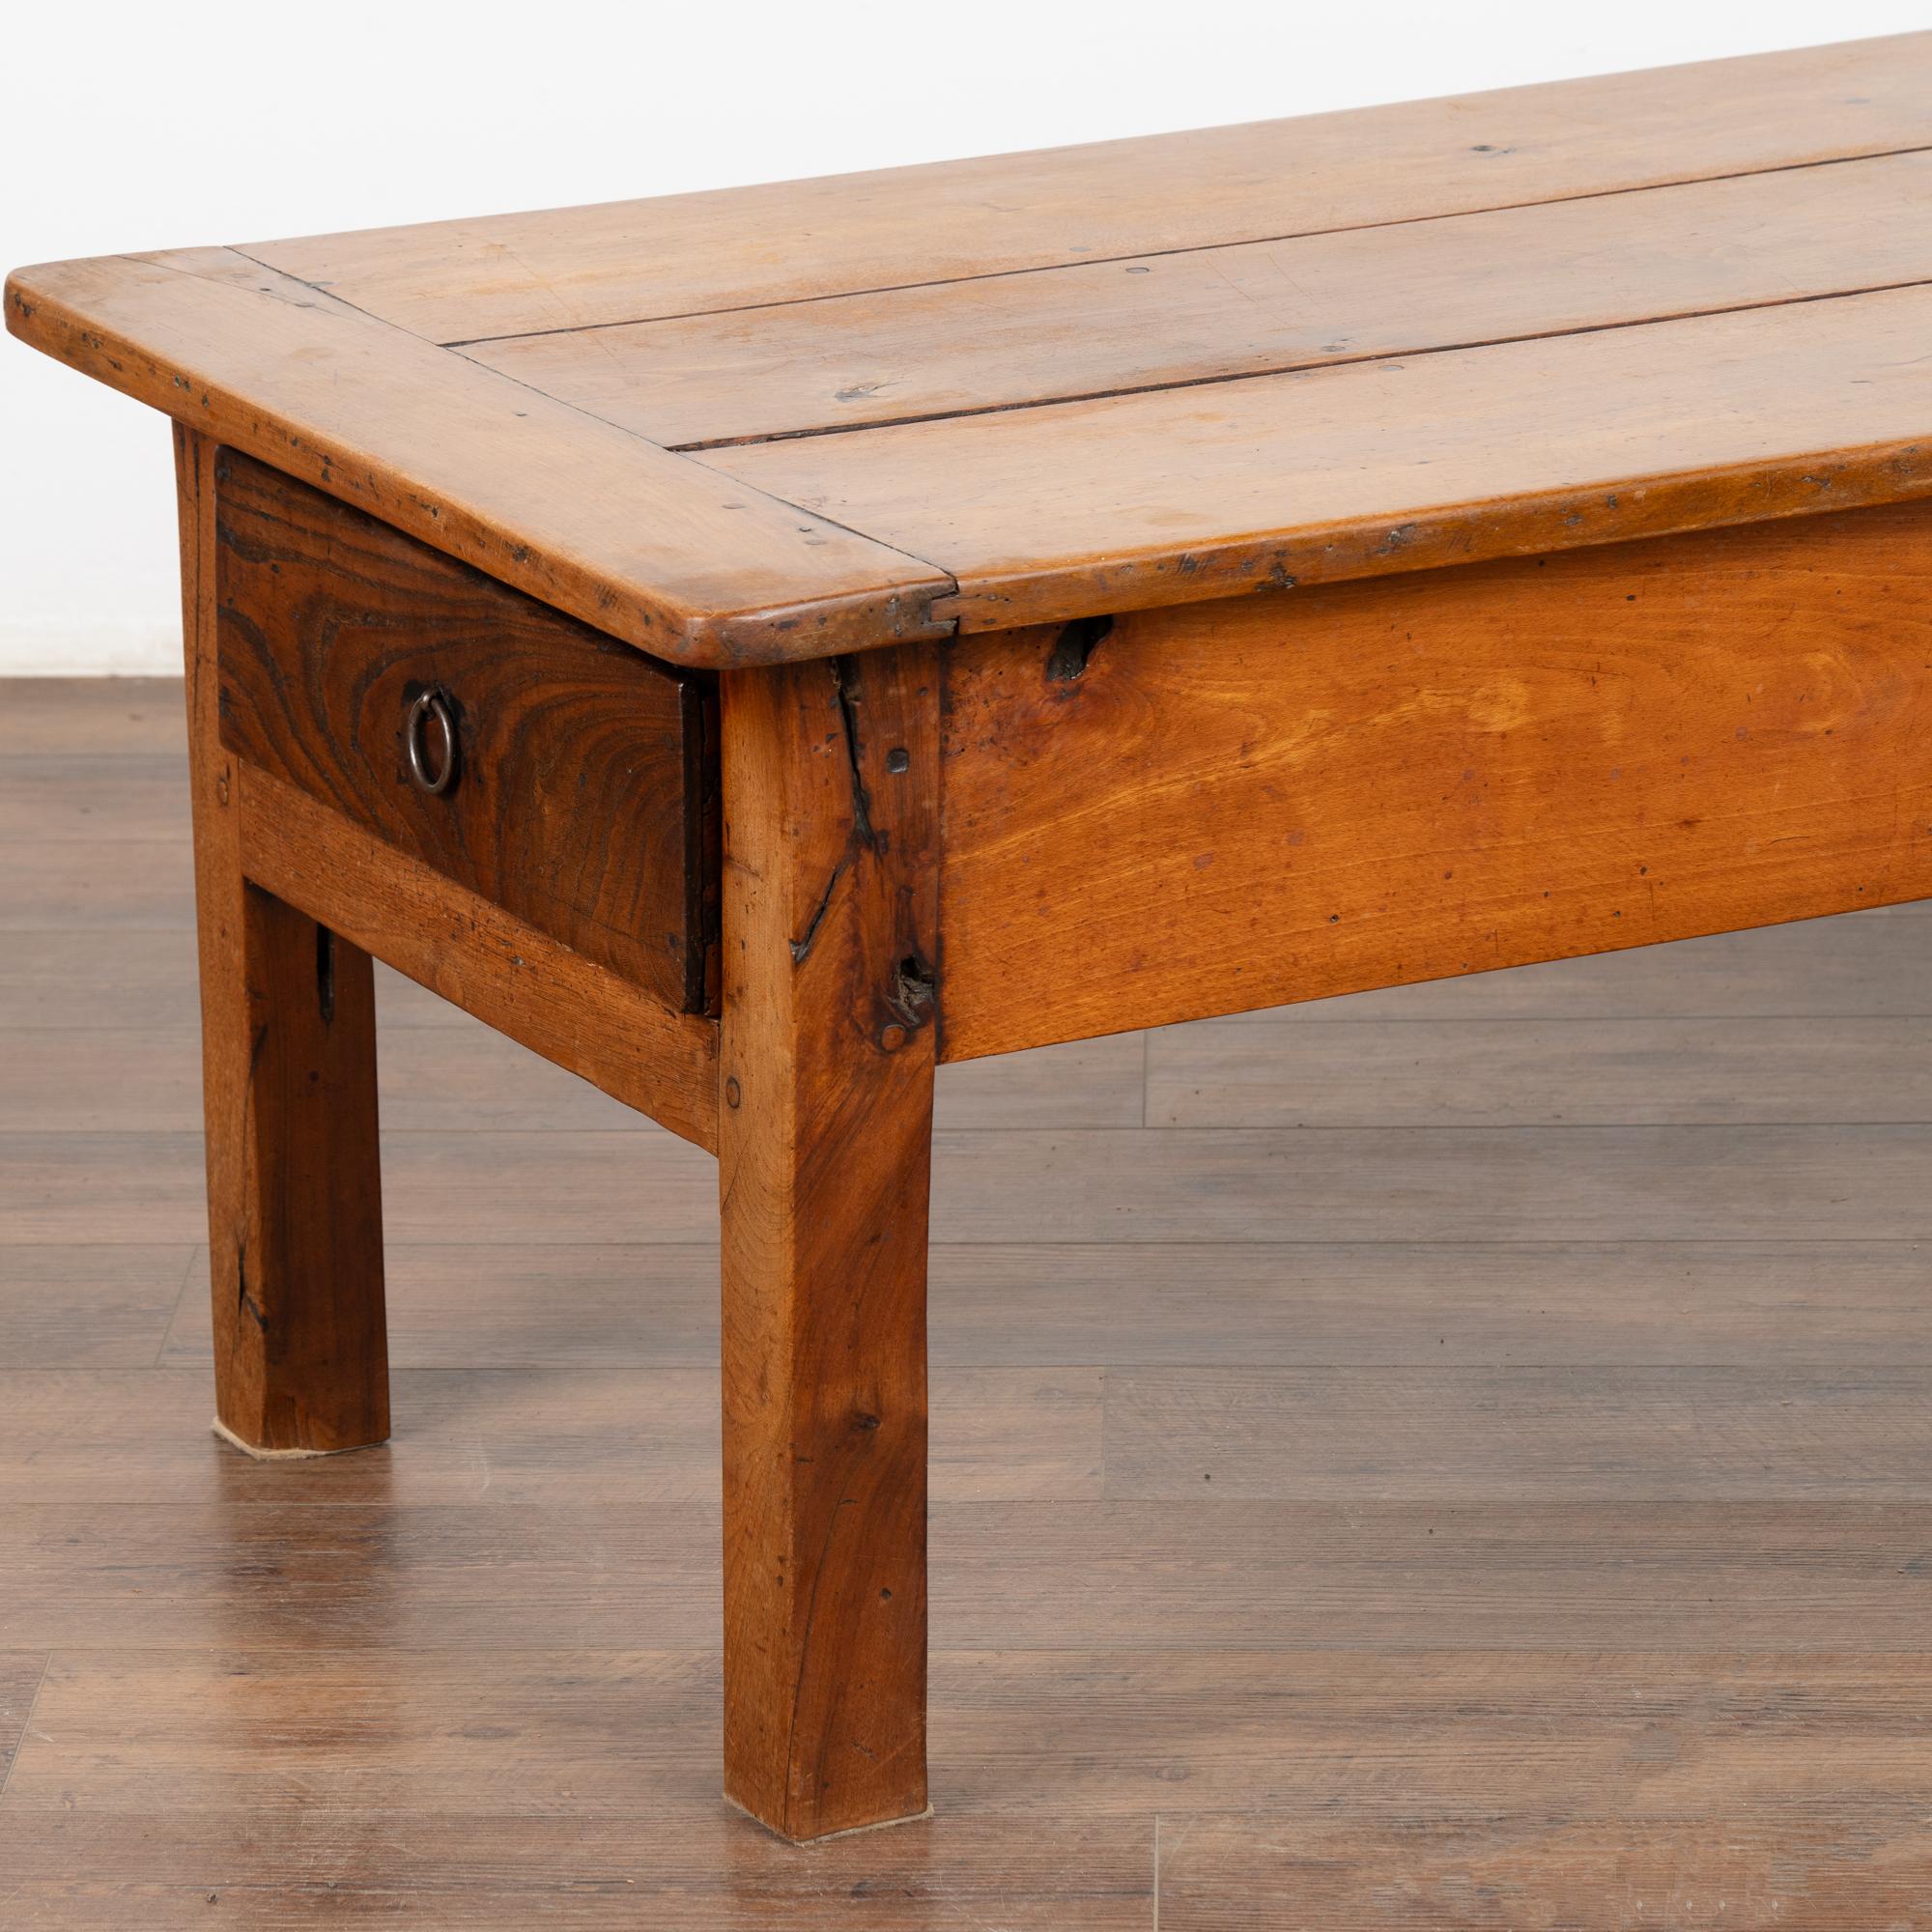 Wood French Country Coffee Table with Two Drawers, circa 1820-40 For Sale